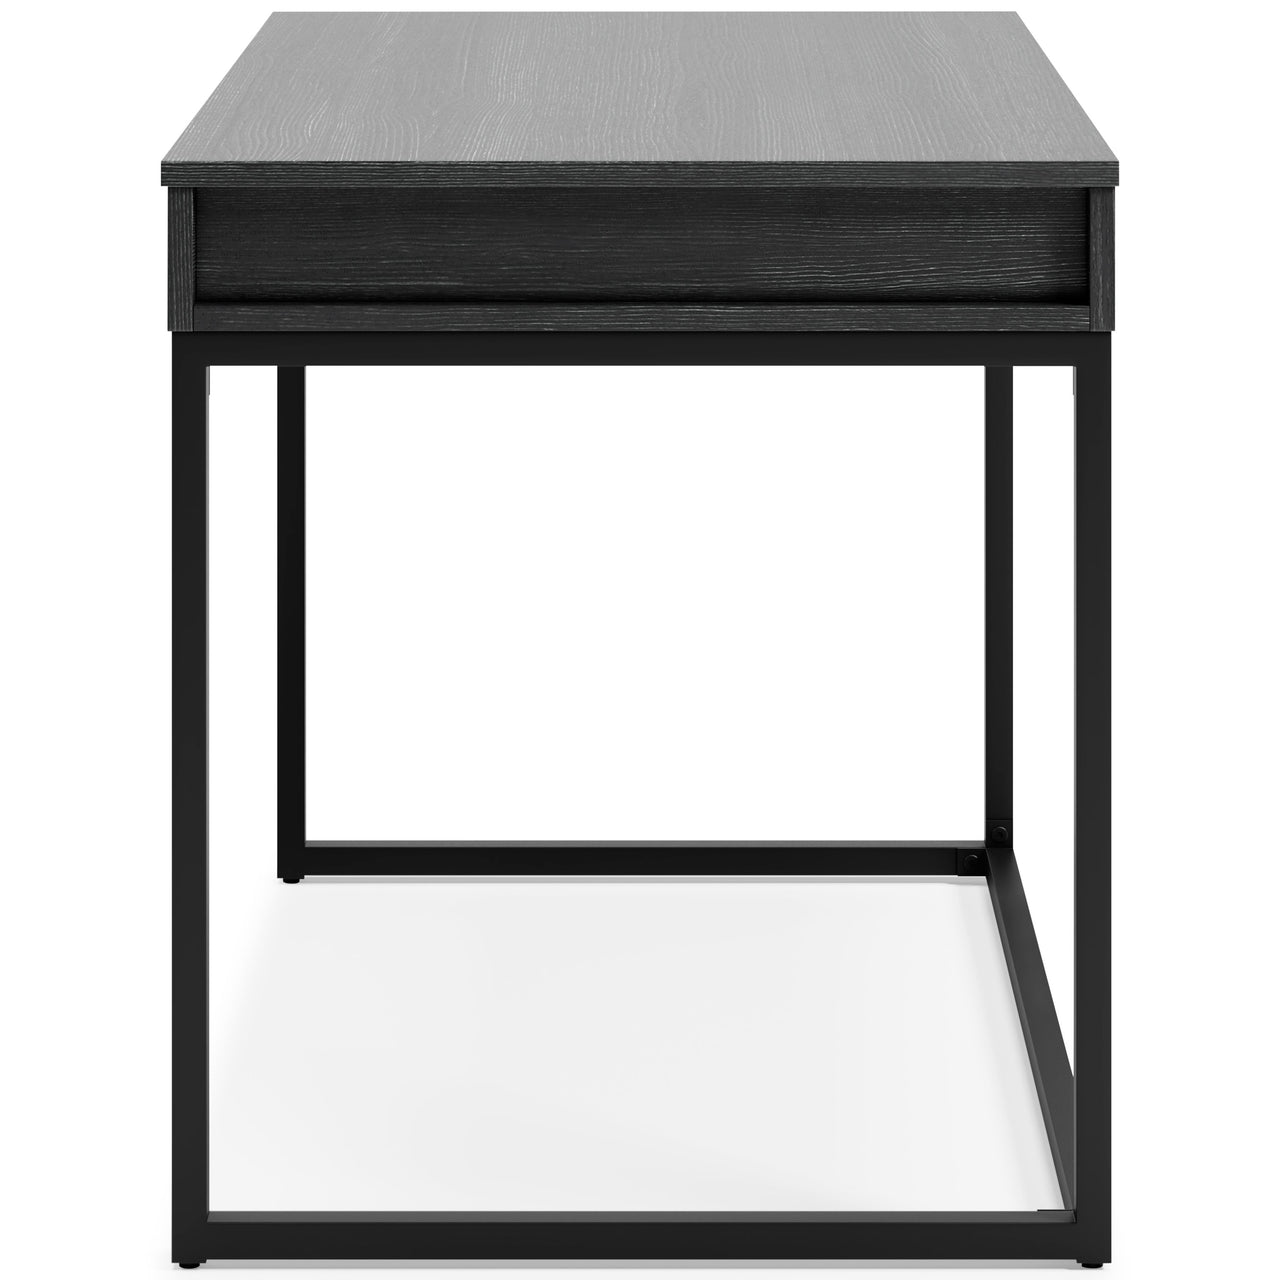 Yarlow - Black - Home Office Lift Top Desk - Tony's Home Furnishings